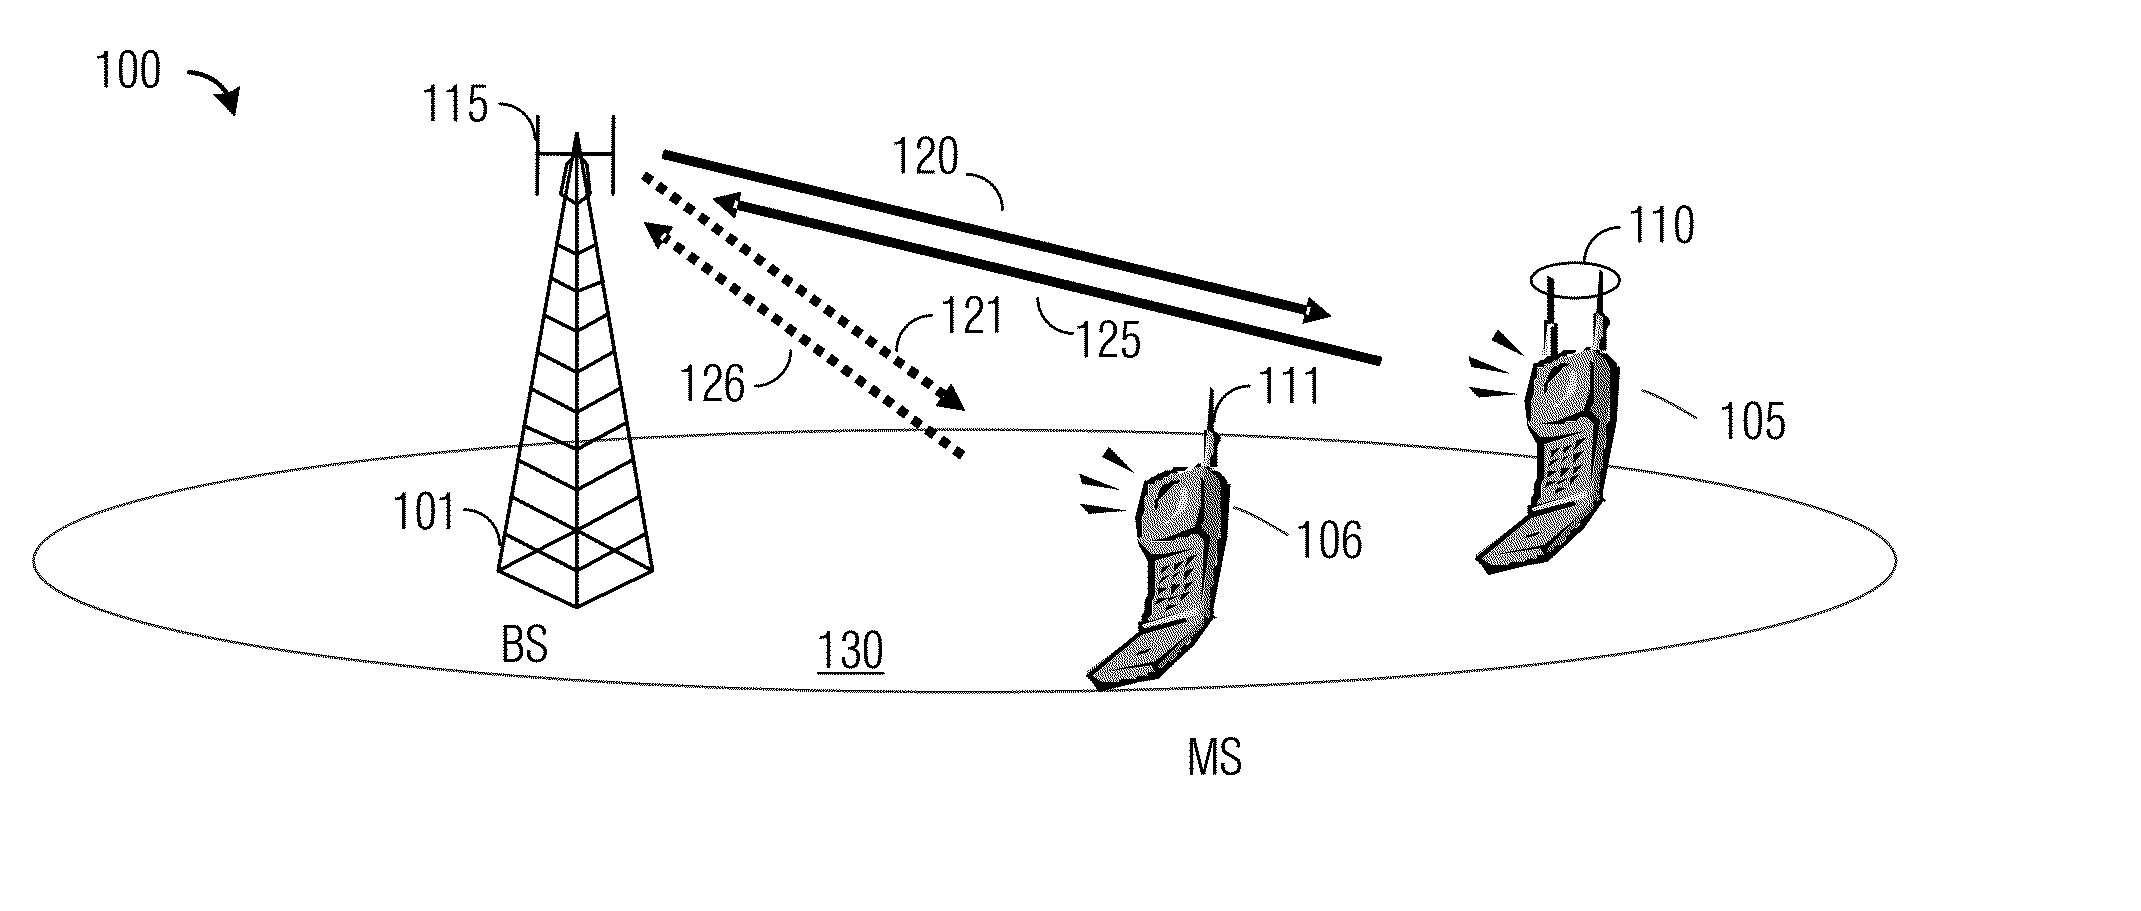 System and Method for Non-Uniform Bit Allocation in the Quantization of Channel State Vectors